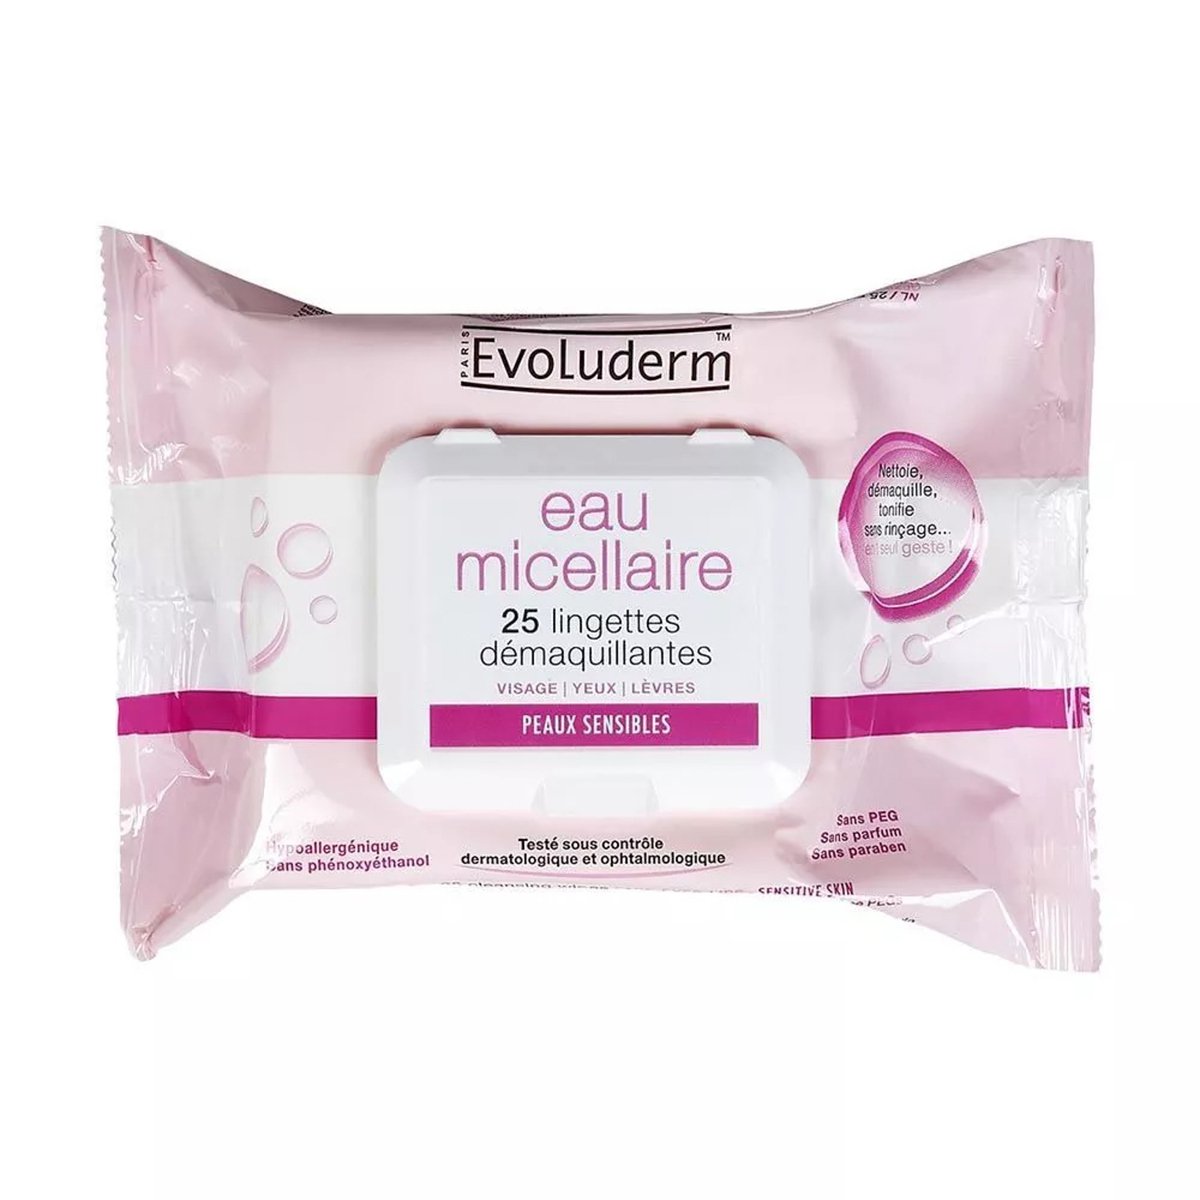 Evoluderm Micellar Water Cleansing Wipes 25 pcs